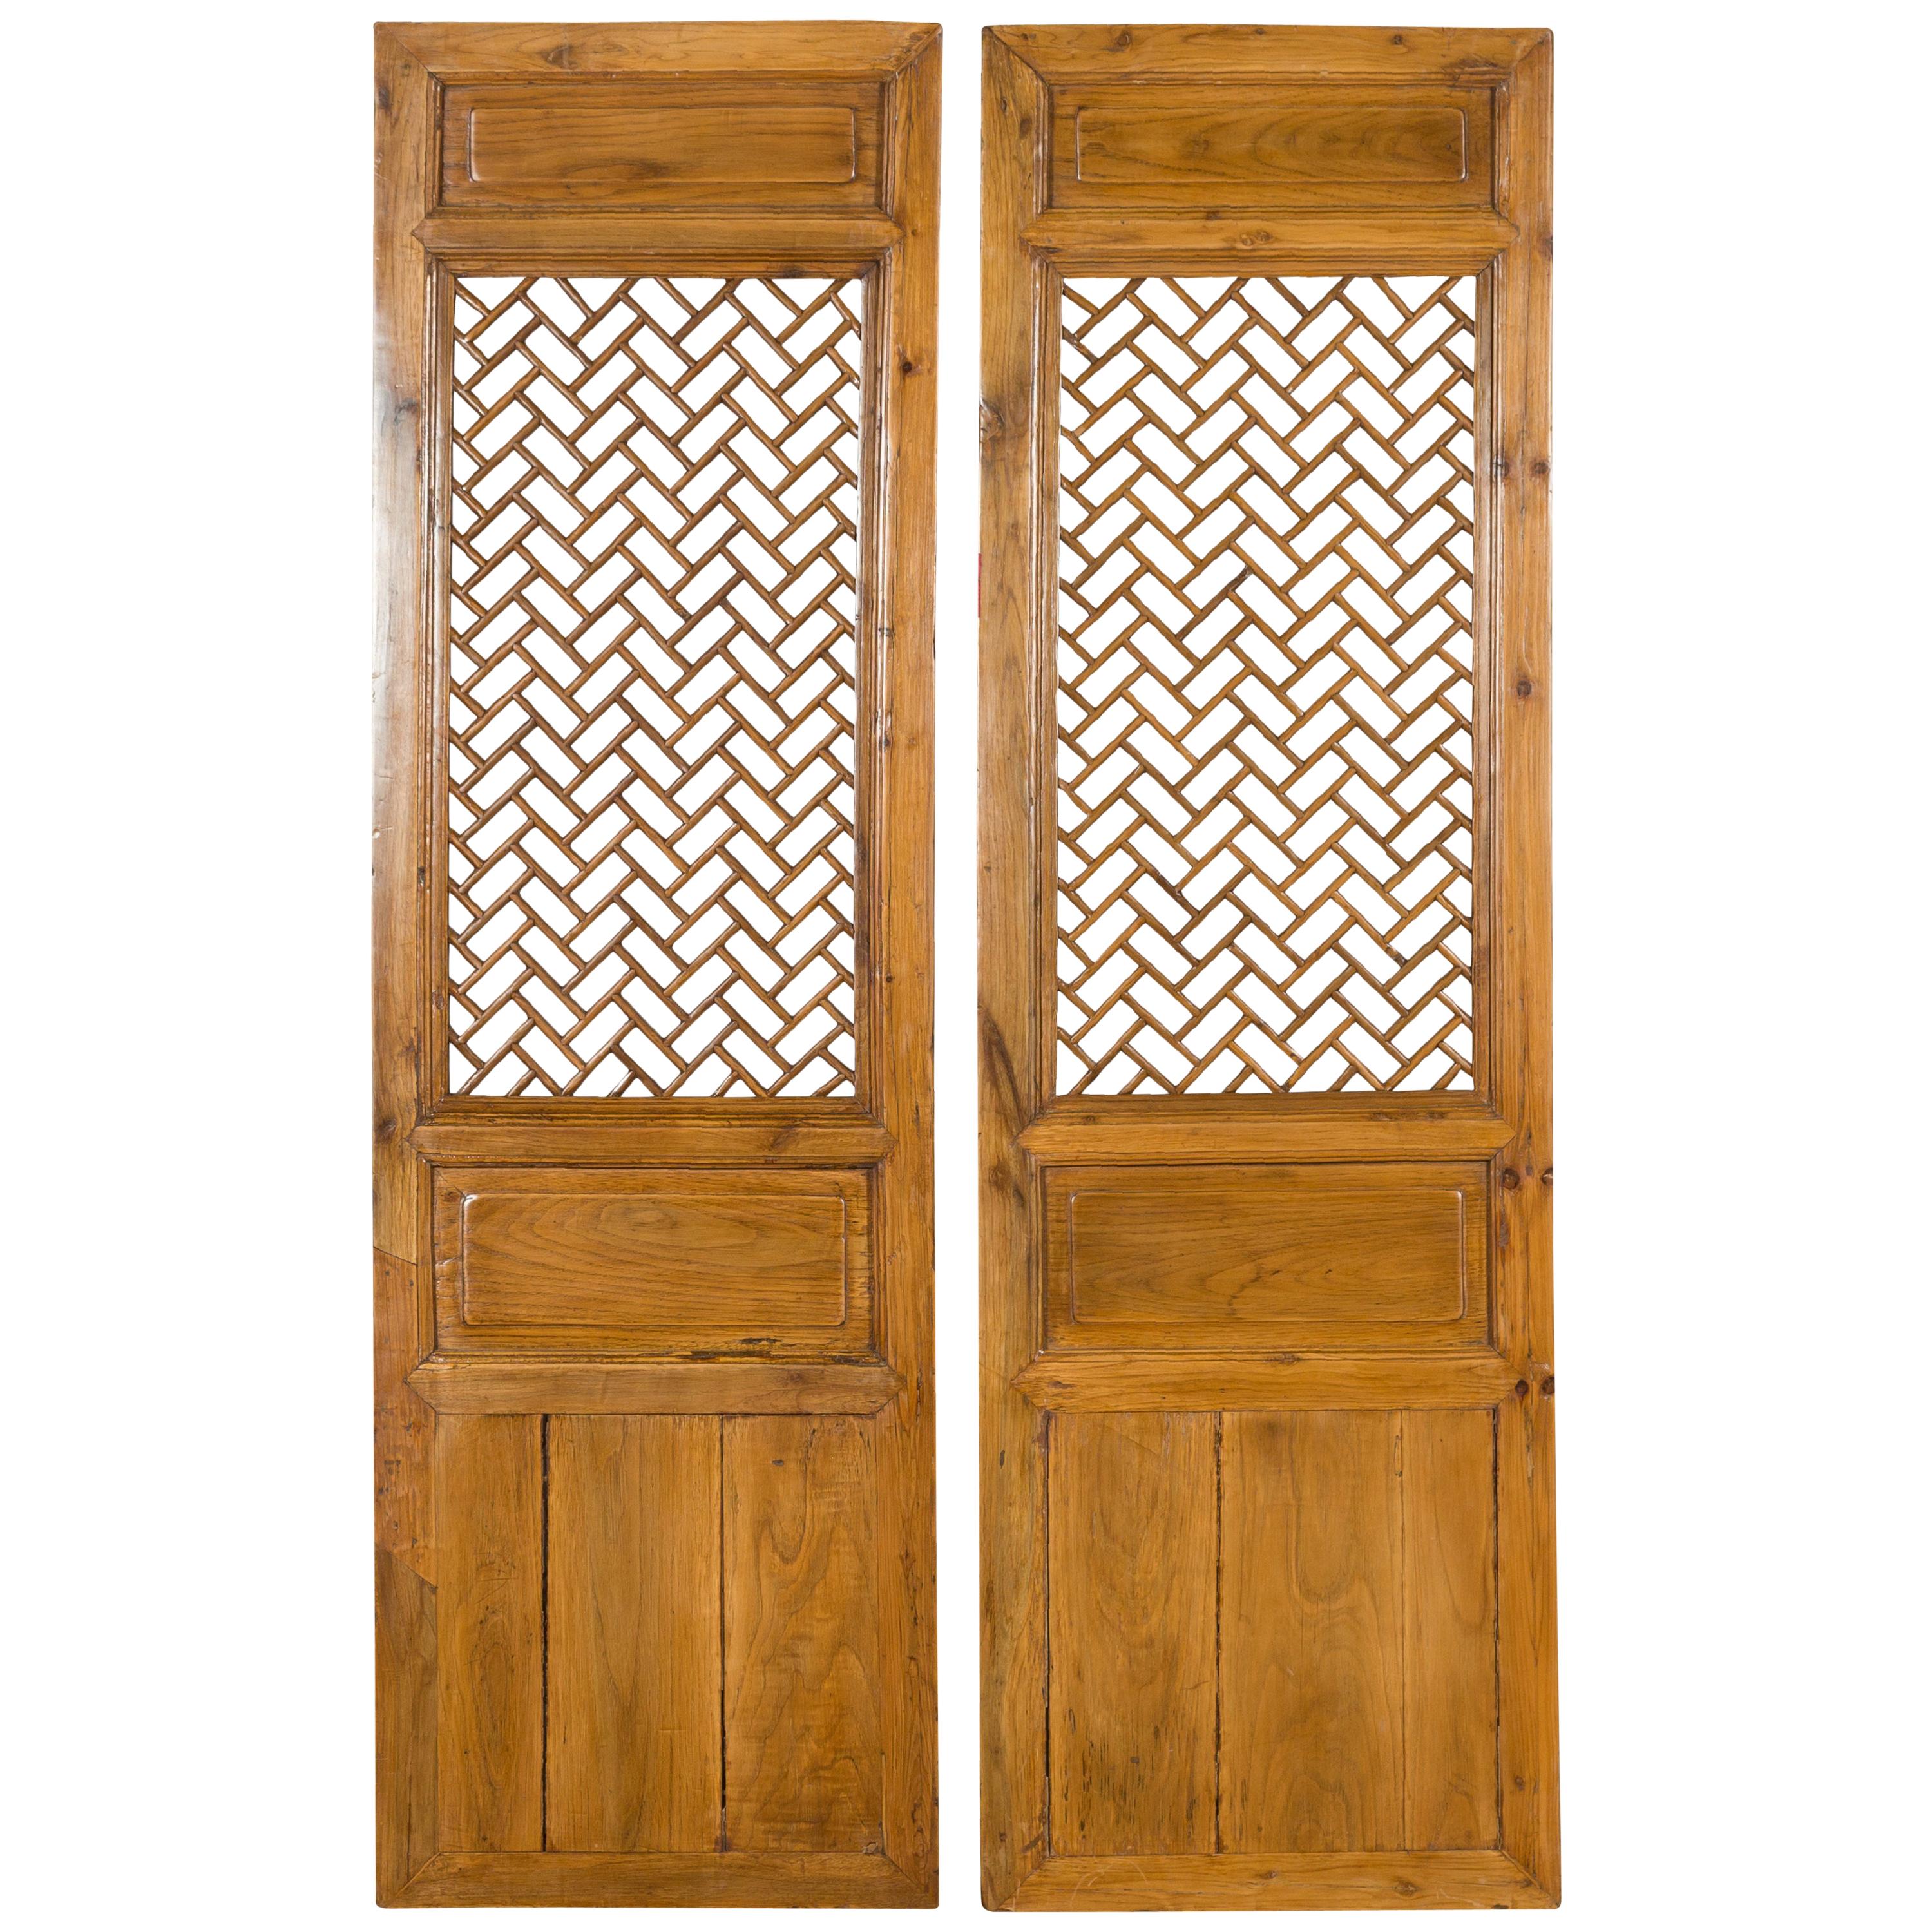 Pair of Chinese Qing Dynasty 19th Century Carved Screens with Fretwork Motifs